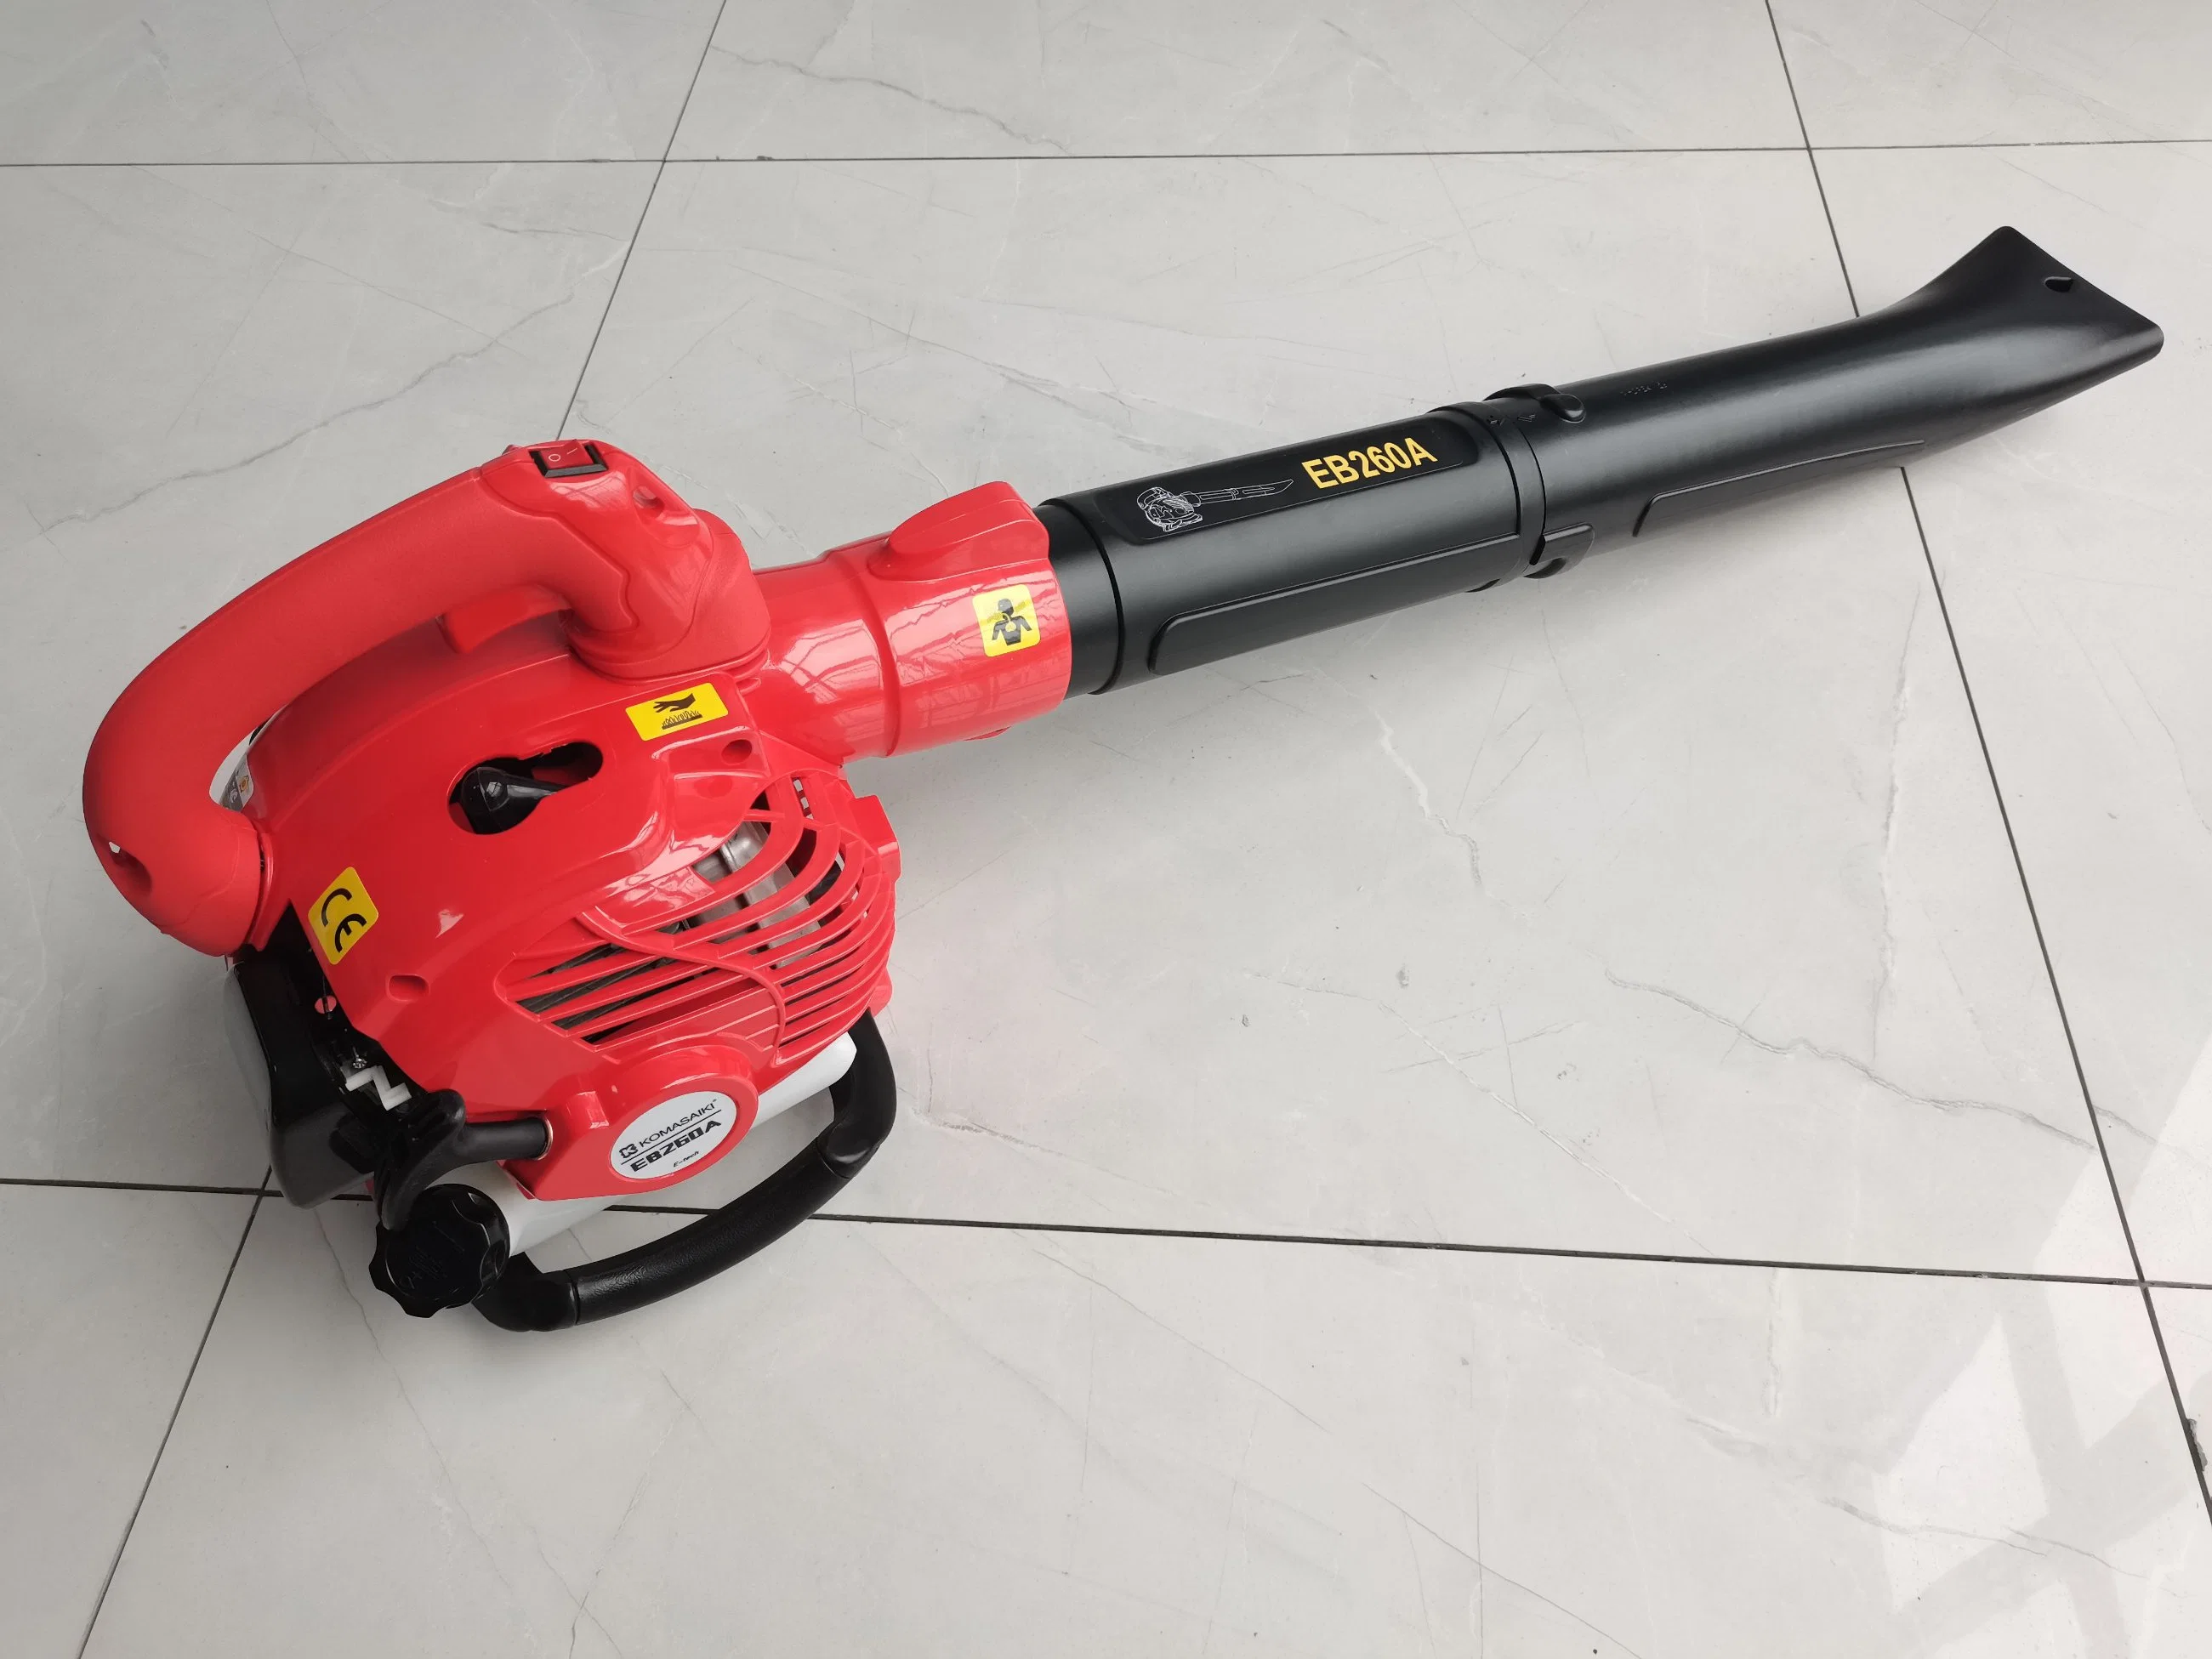 Portable Leaf and Snow Blower for Garden Cleaning